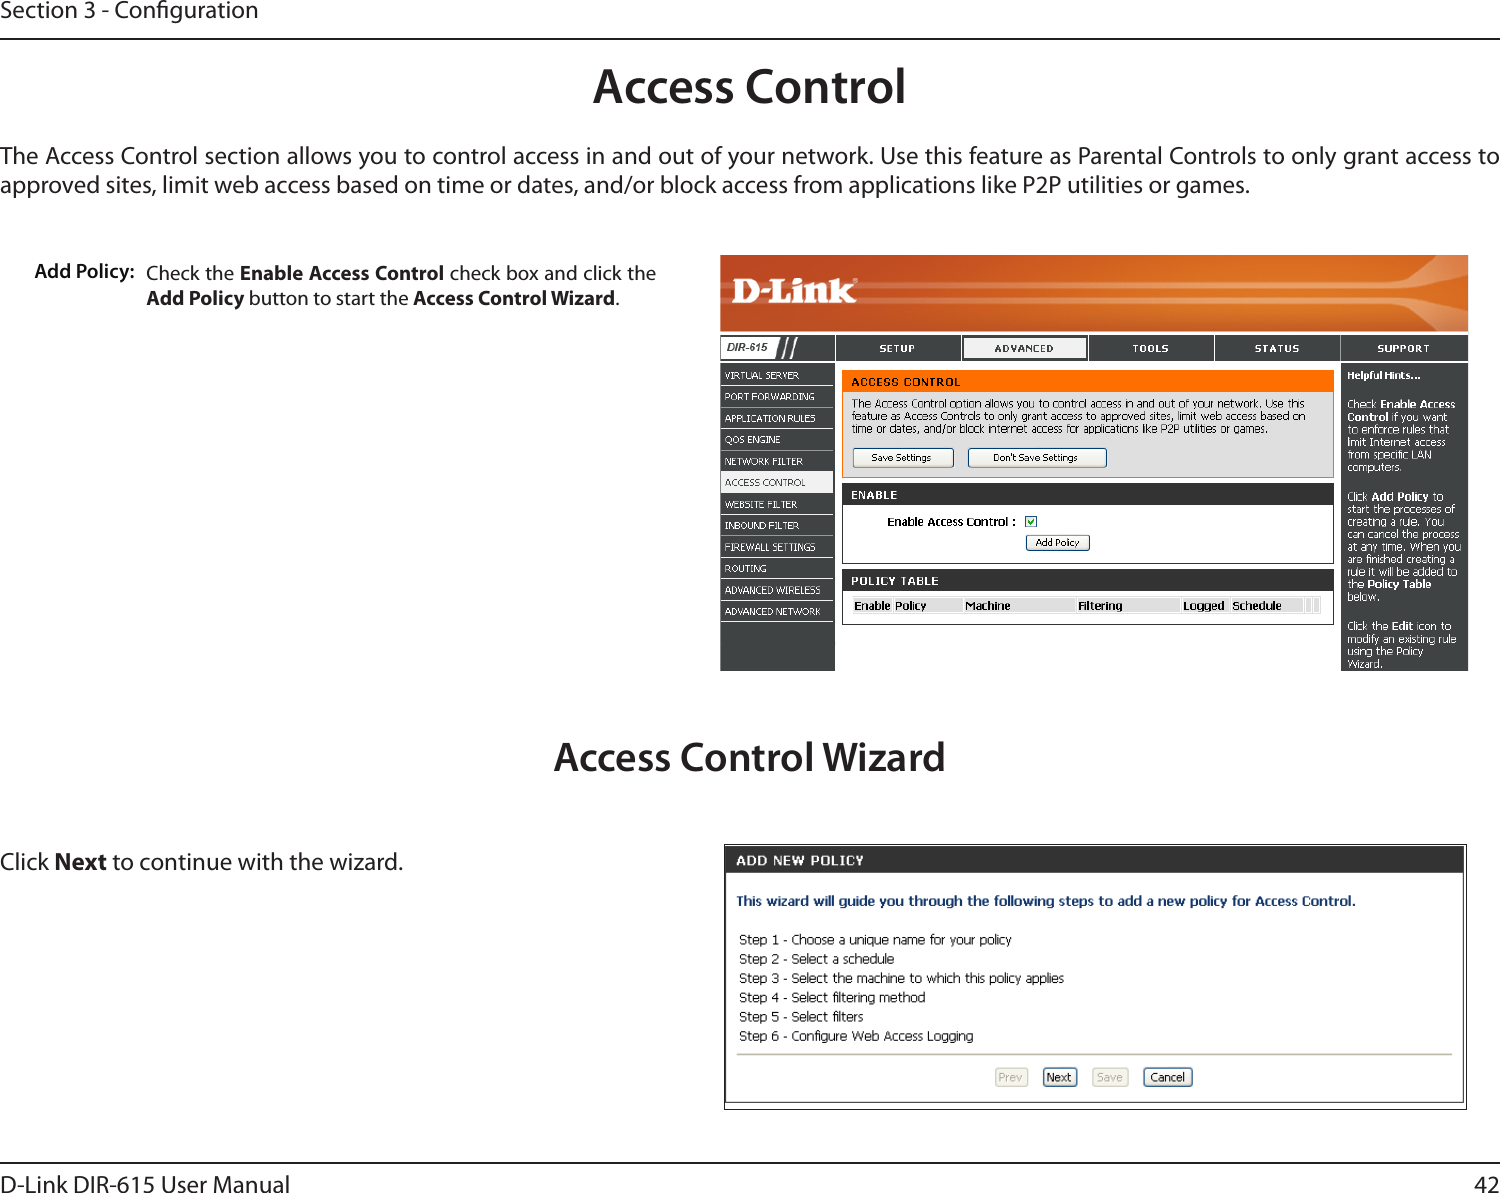 42D-Link DIR-615 User ManualSection 3 - CongurationAccess ControlCheck the Enable Access Control check box and click the Add Policy button to start the Access Control Wizard. Add Policy:The Access Control section allows you to control access in and out of your network. Use this feature as Parental Controls to only grant access to approved sites, limit web access based on time or dates, and/or block access from applications like P2P utilities or games.Click Next to continue with the wizard.Access Control Wizard